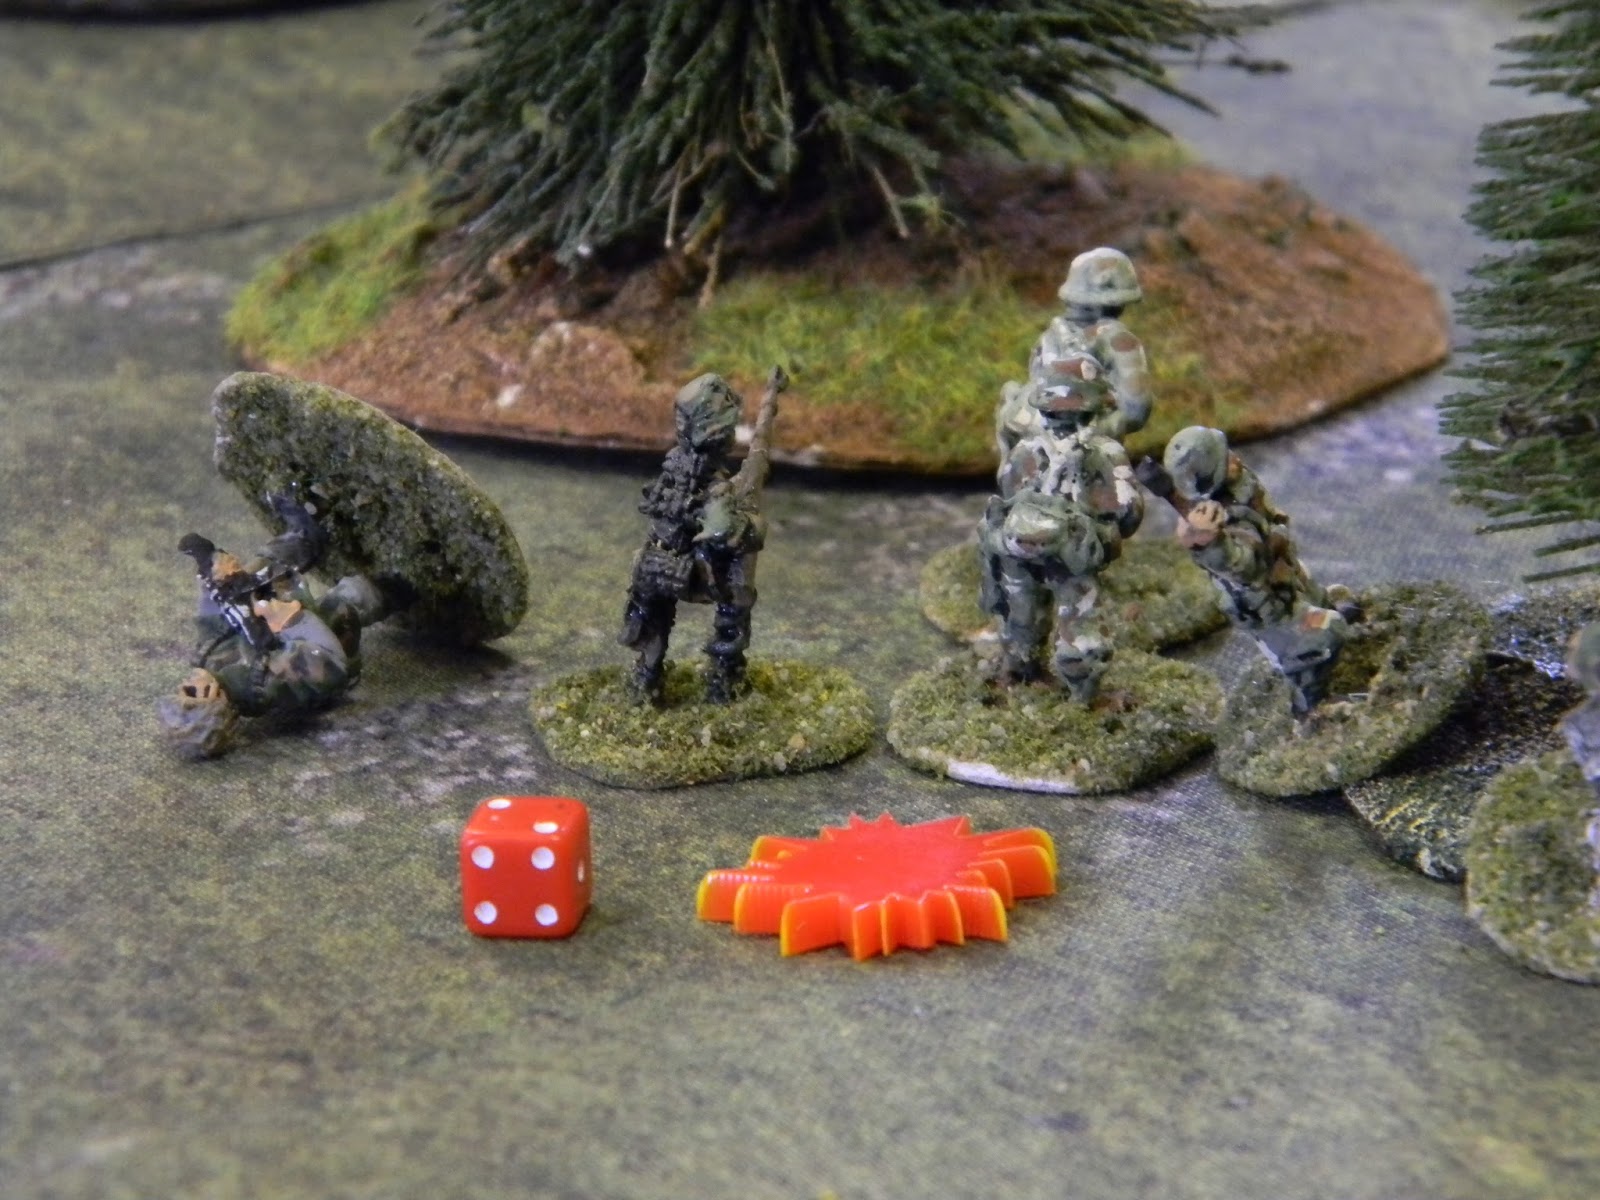  The sniper is good - a kill straight away plus two shocks and the unit is pinned down. 